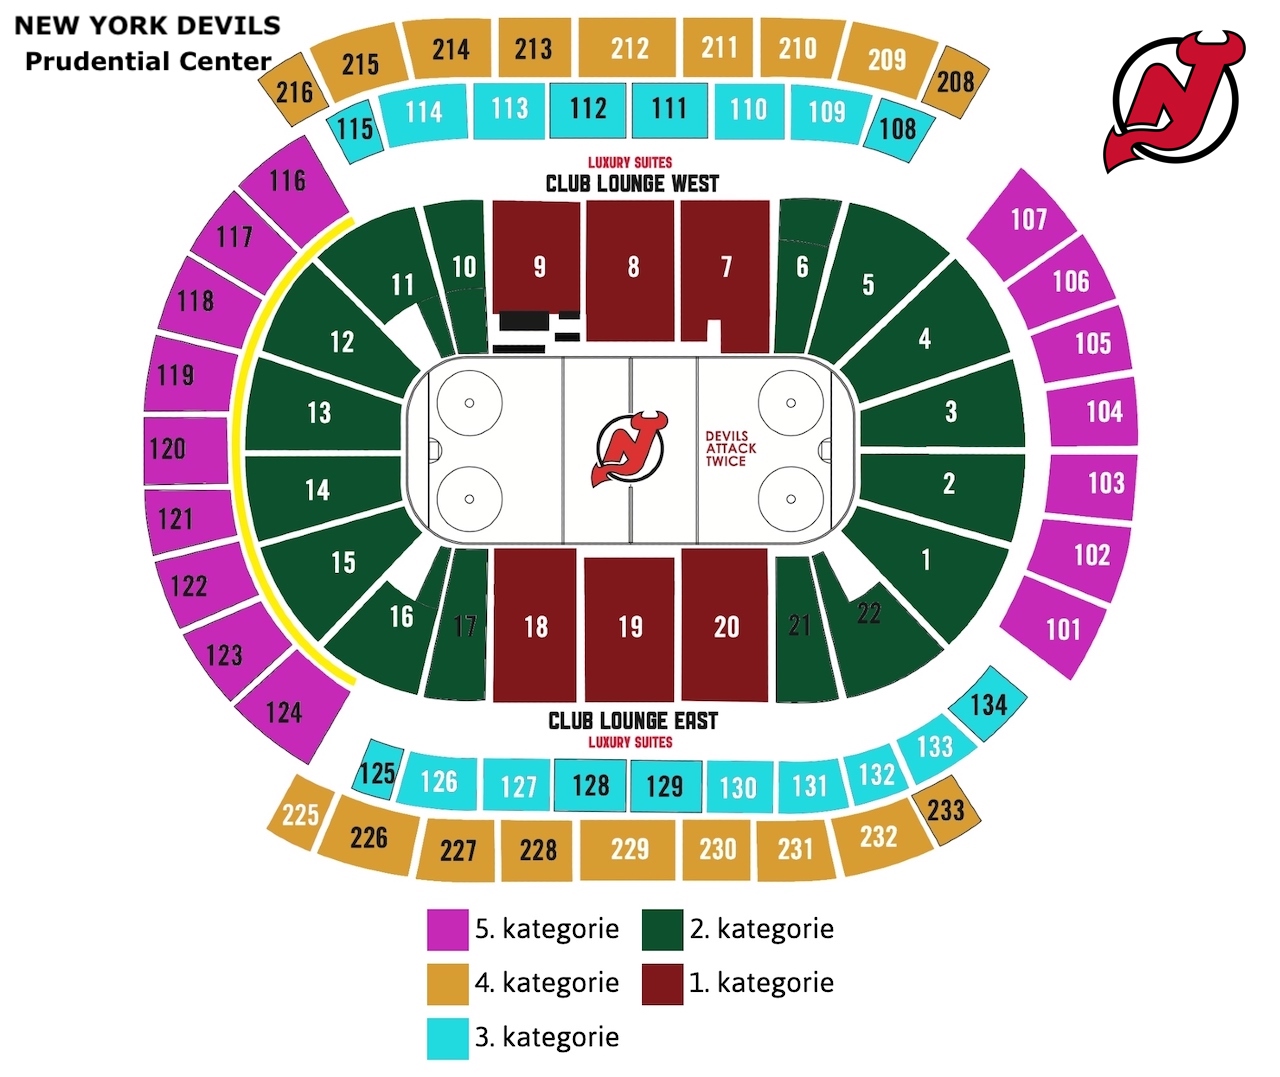 NY Devils | Prudential Center - map.